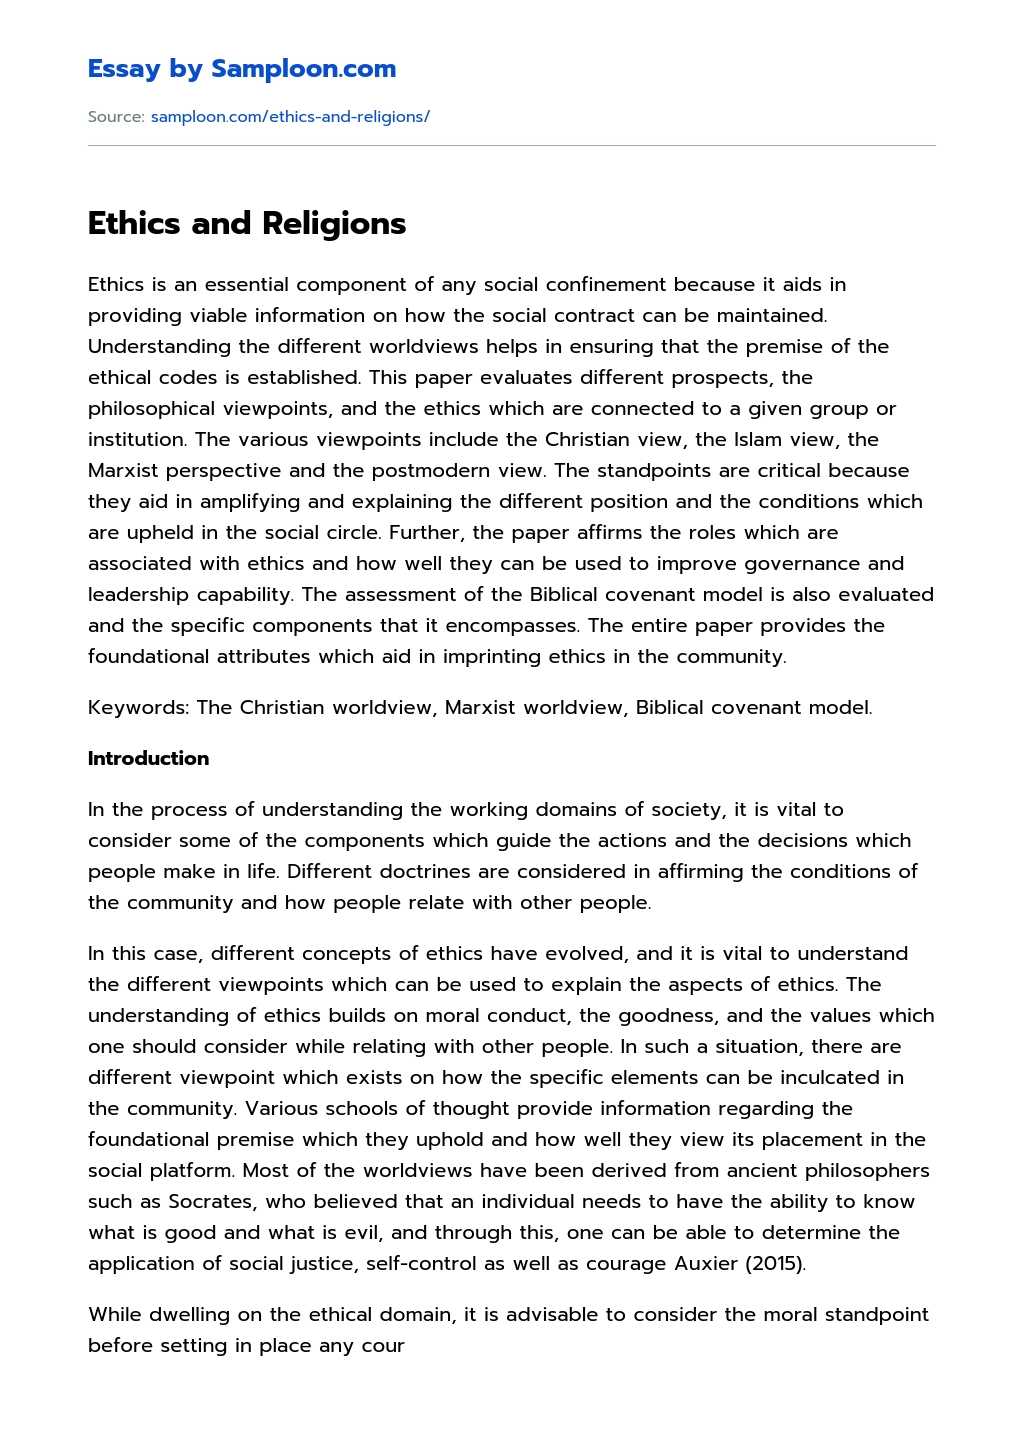 Ethics and Religions essay